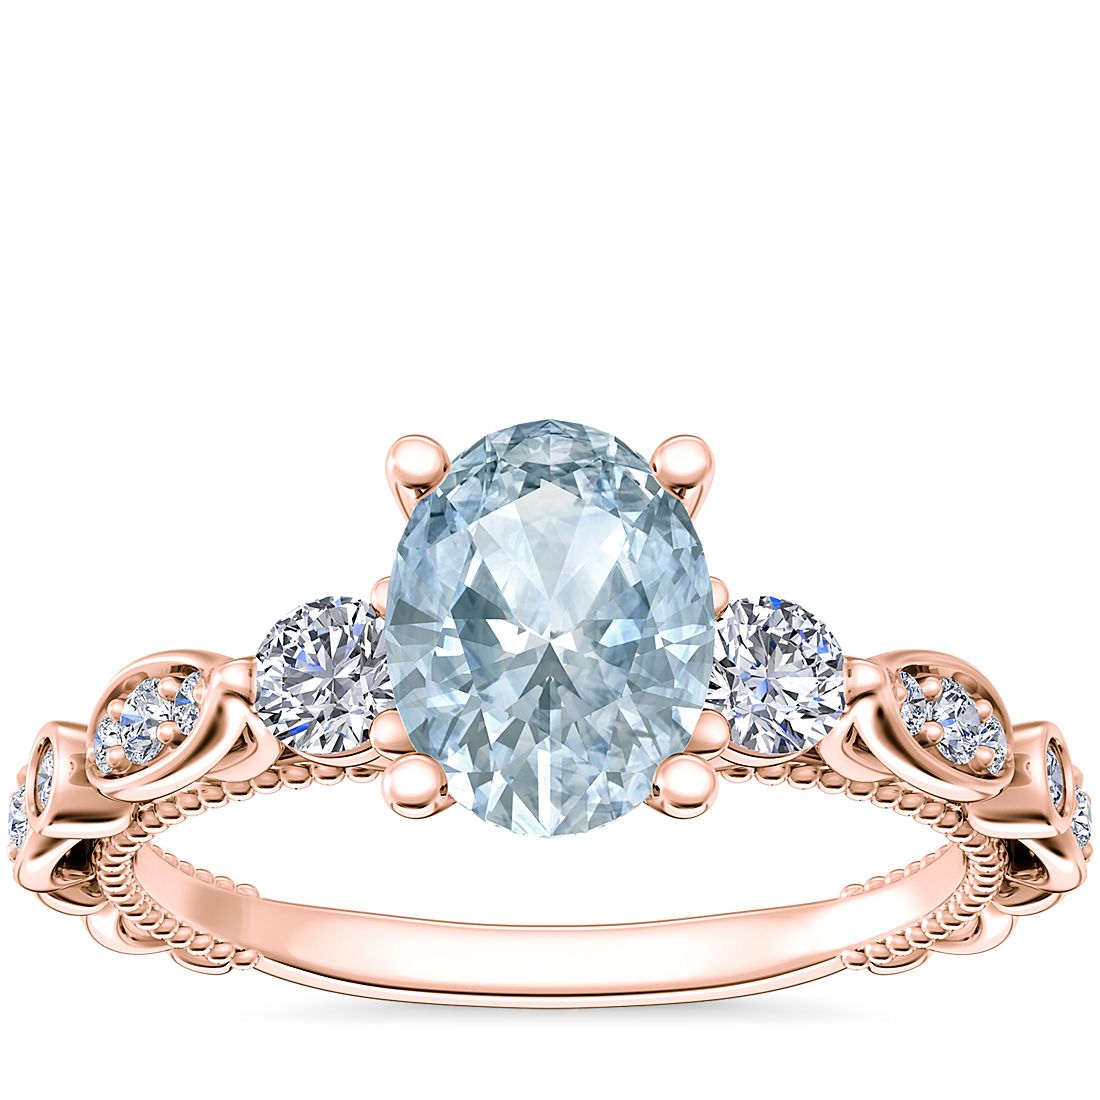 Floral Ellipse Diamond Cathedral Engagement Ring with Oval Aquamarine in 14k Rose Gold (8x6mm)